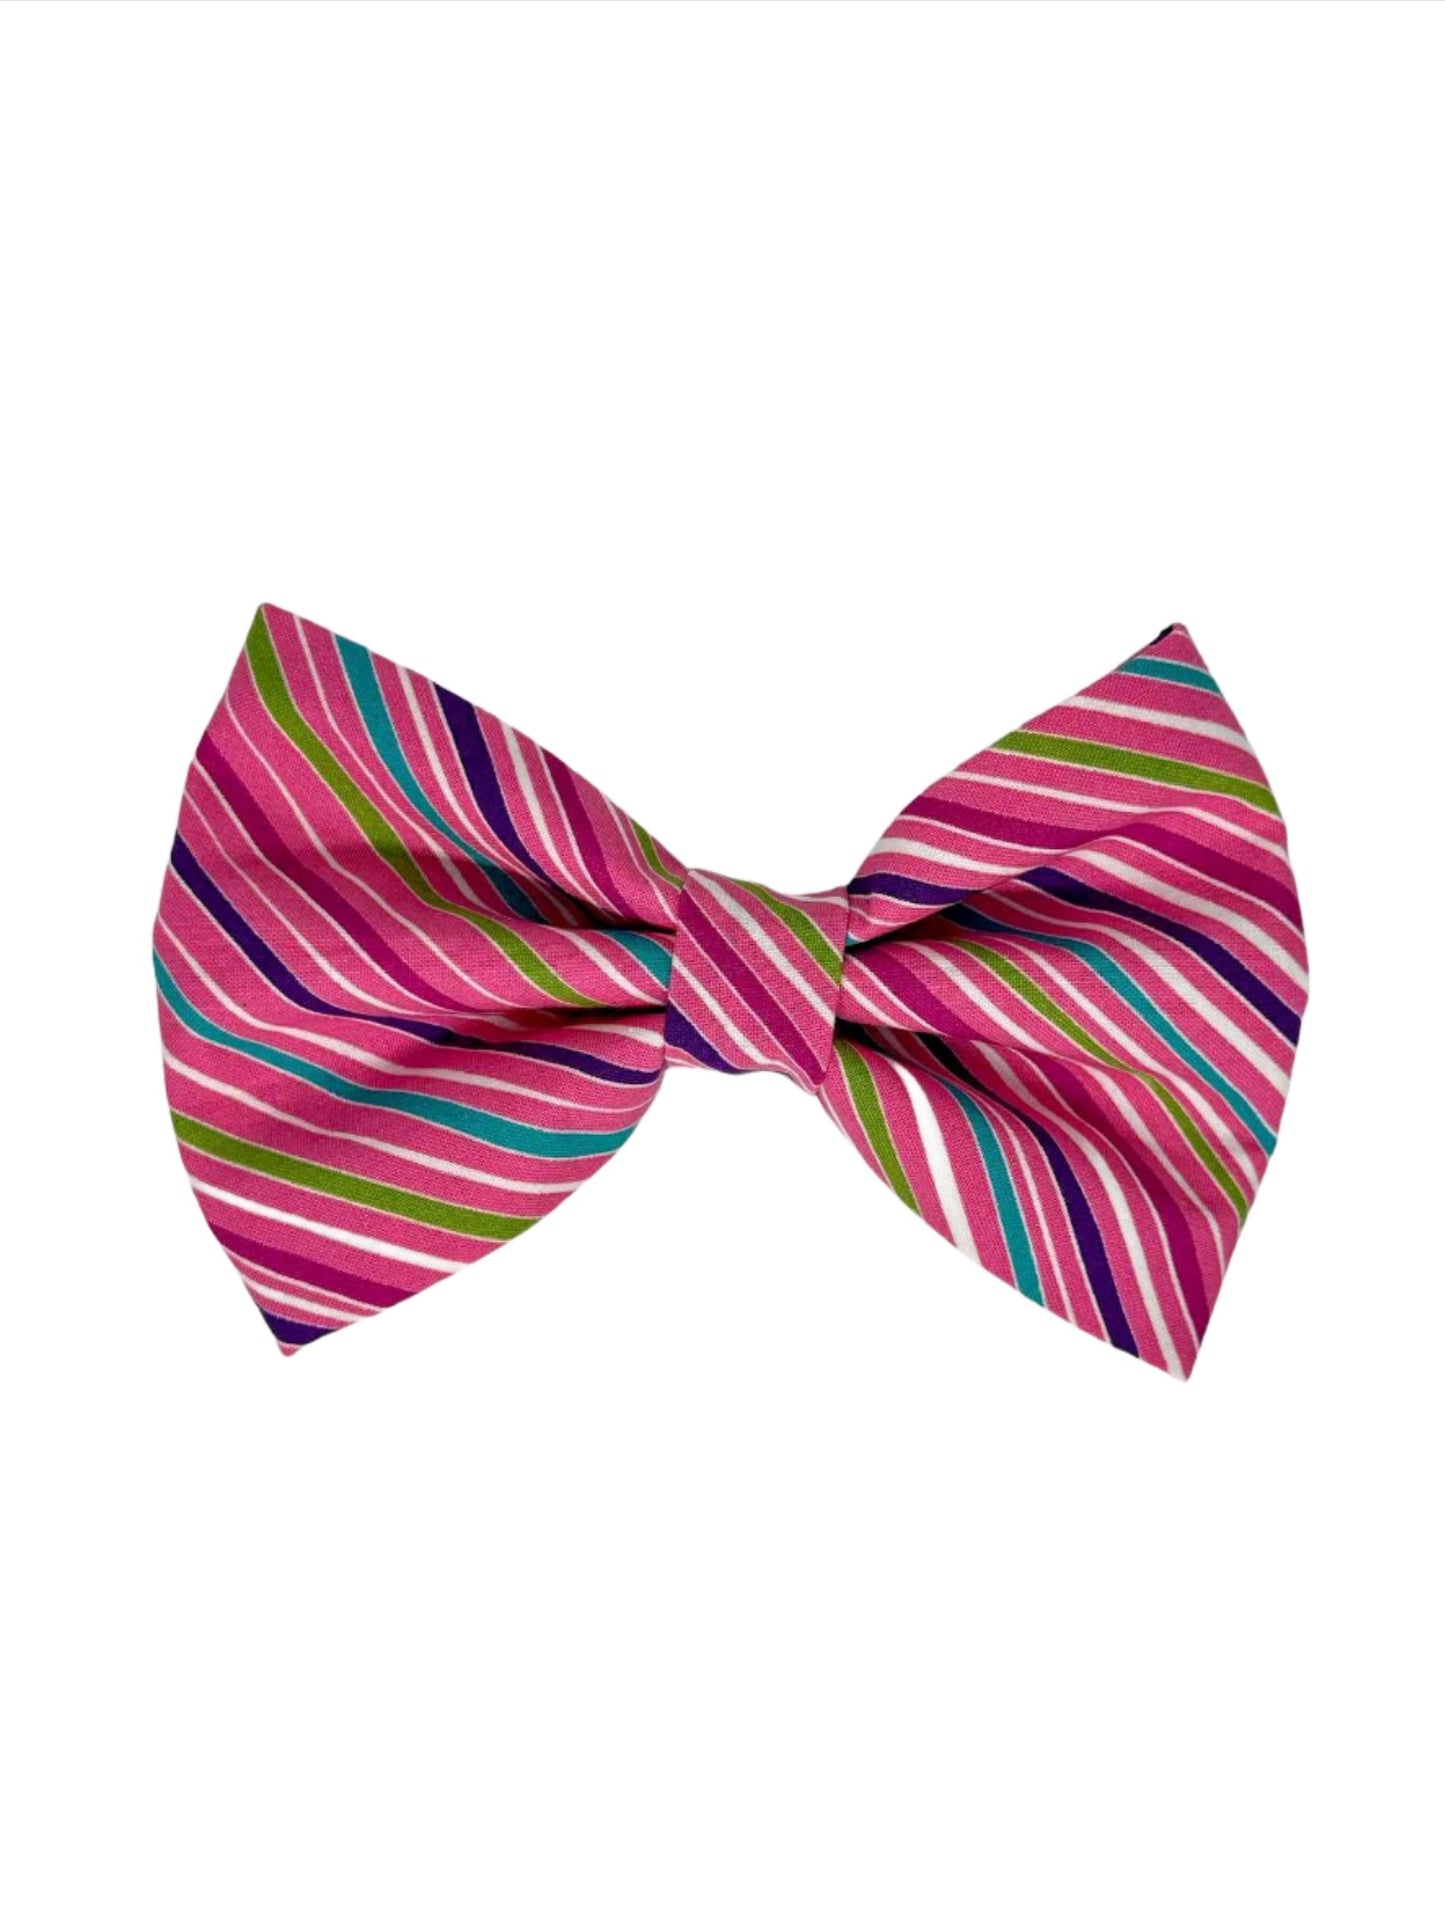 Candy Stripes Bow Tie